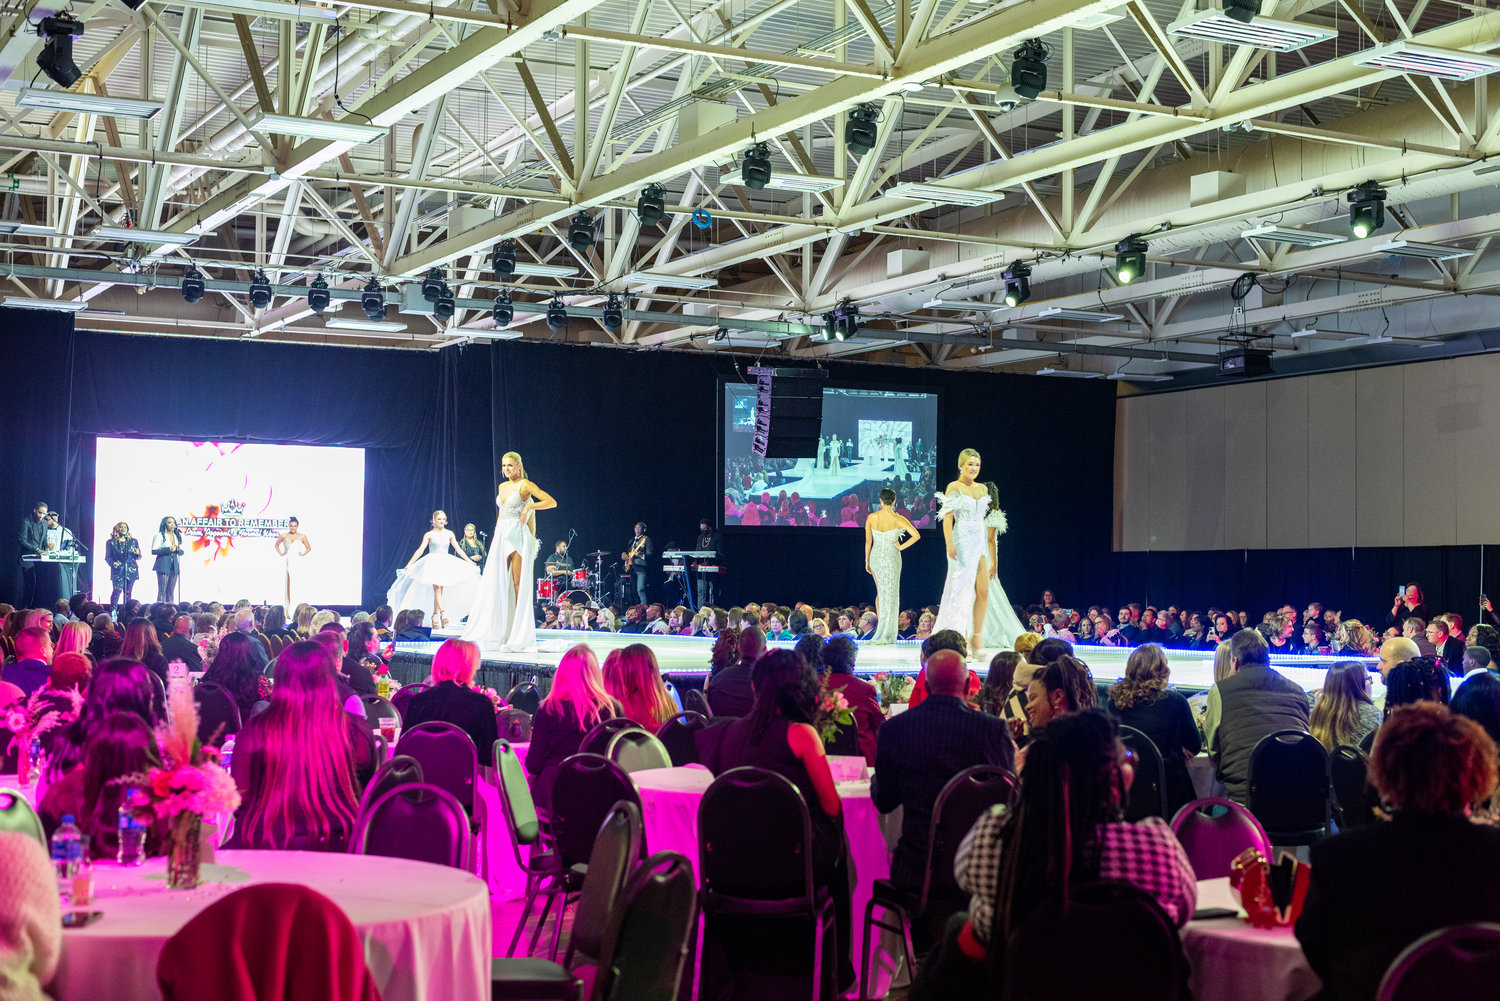 A Runway Extravaganza Fashion Show was presented by An Affair to Remember, took place Jan. 7 at the Crown Expo Center.